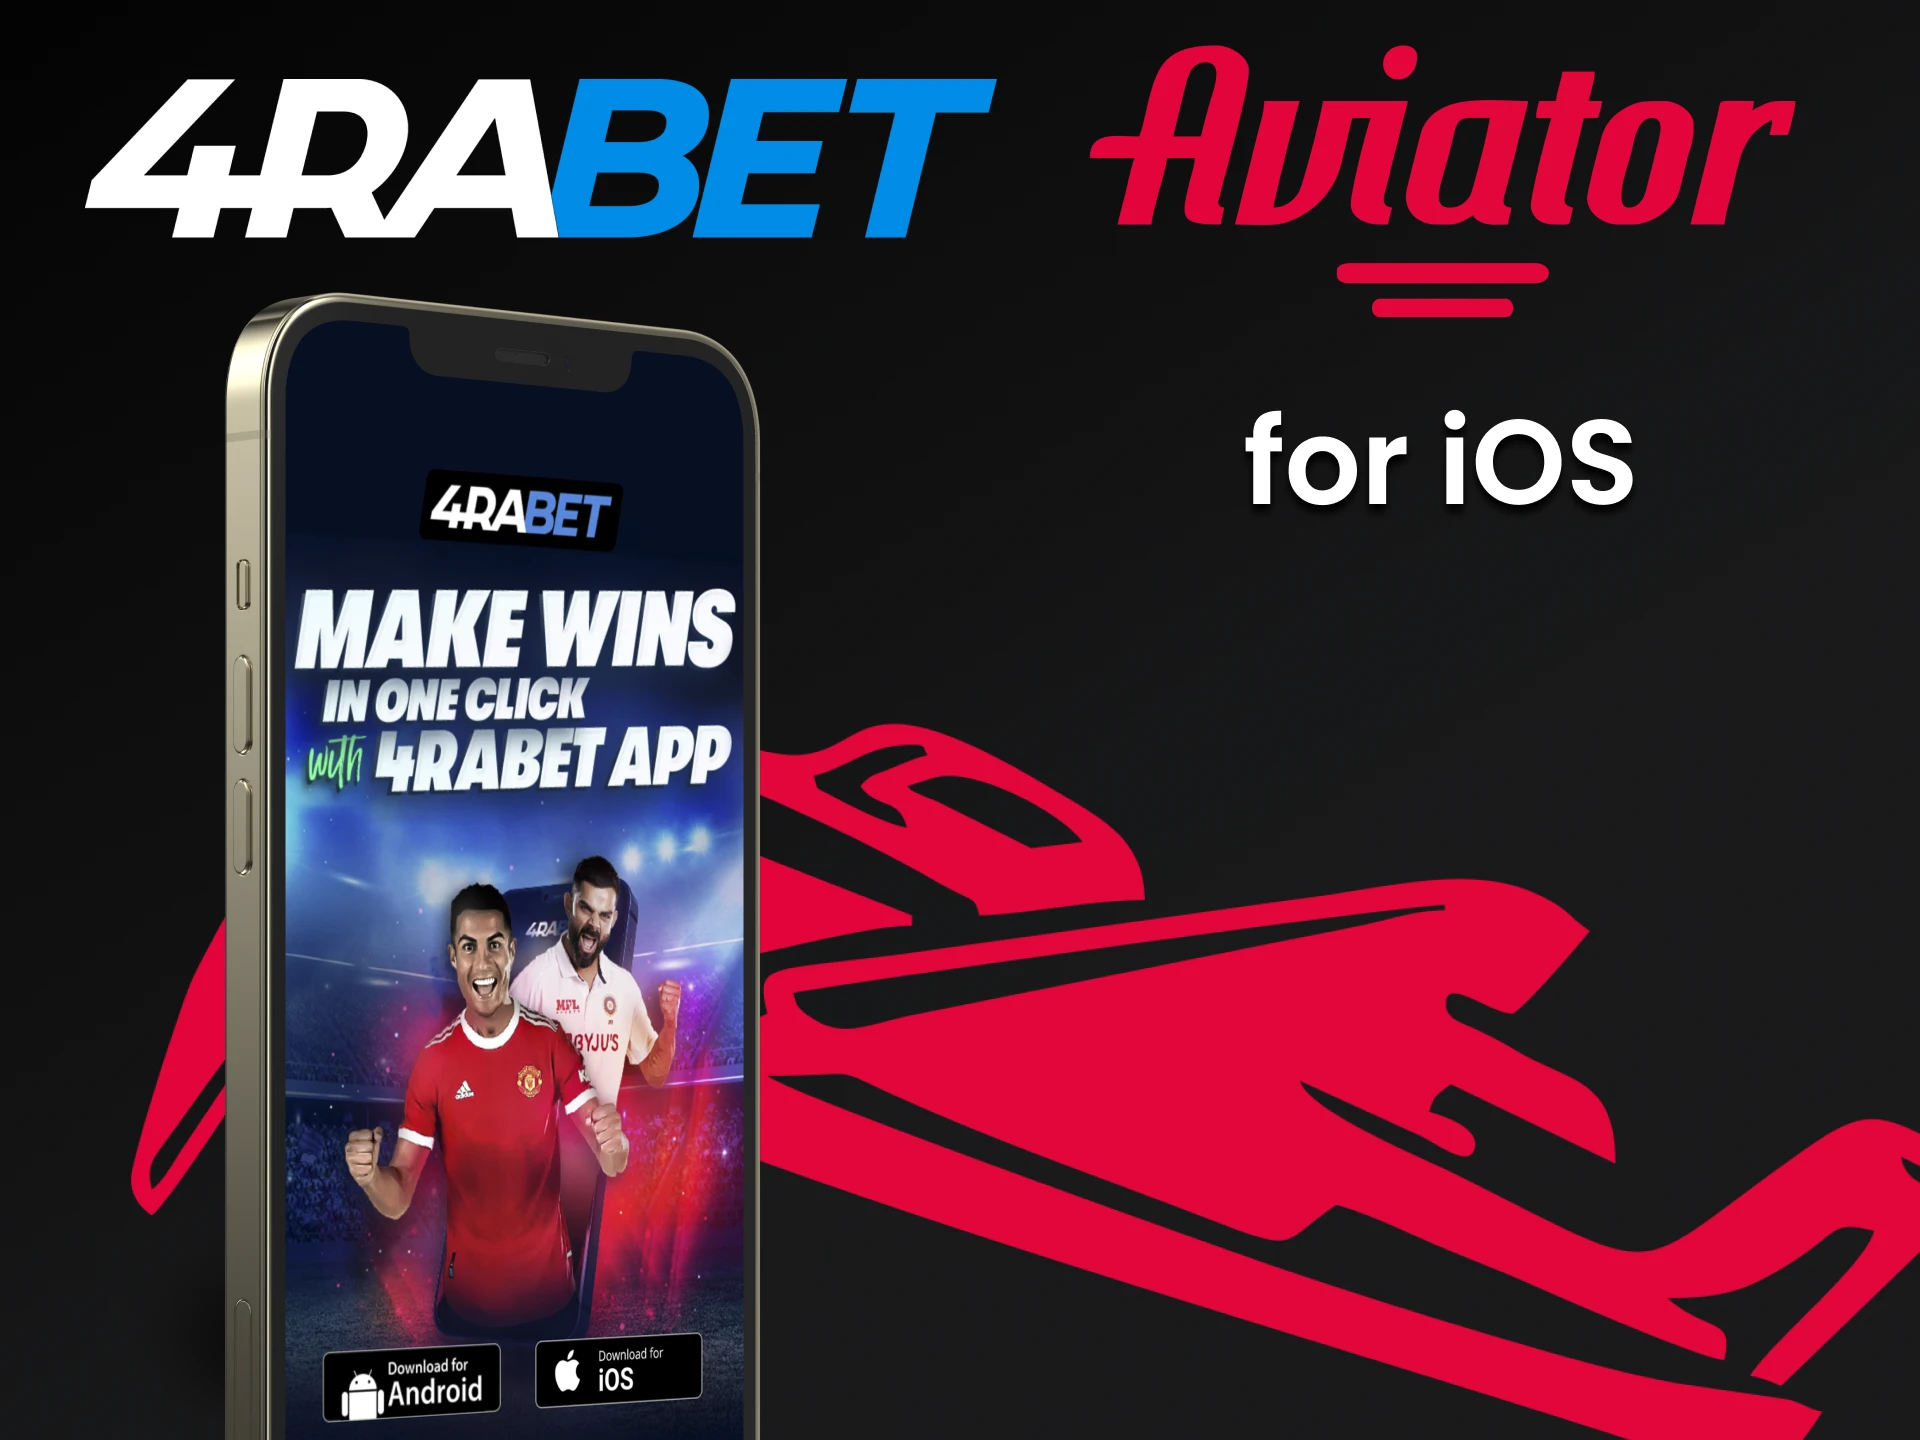 Download the 4rabet app to play Aviator on iOS devices.